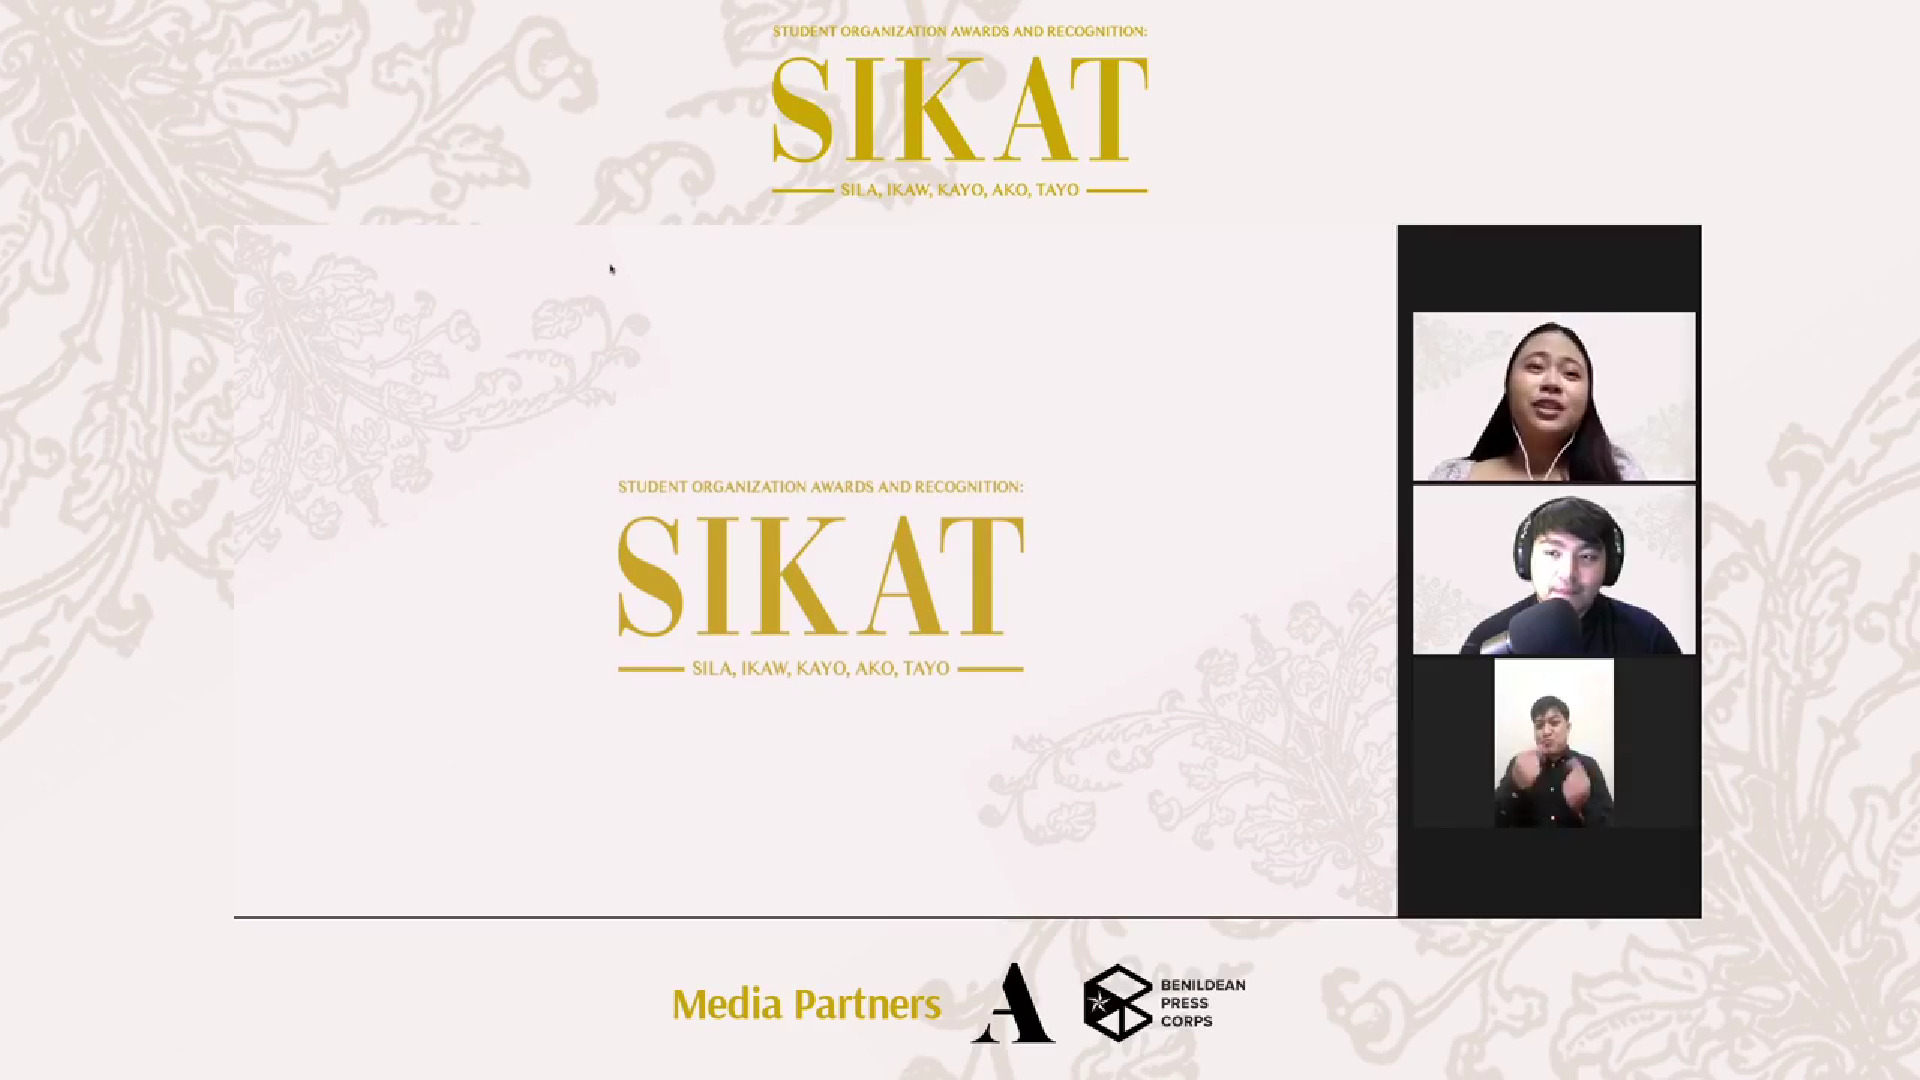 Cover Photo Courtesy Of SOAR: SIKAT